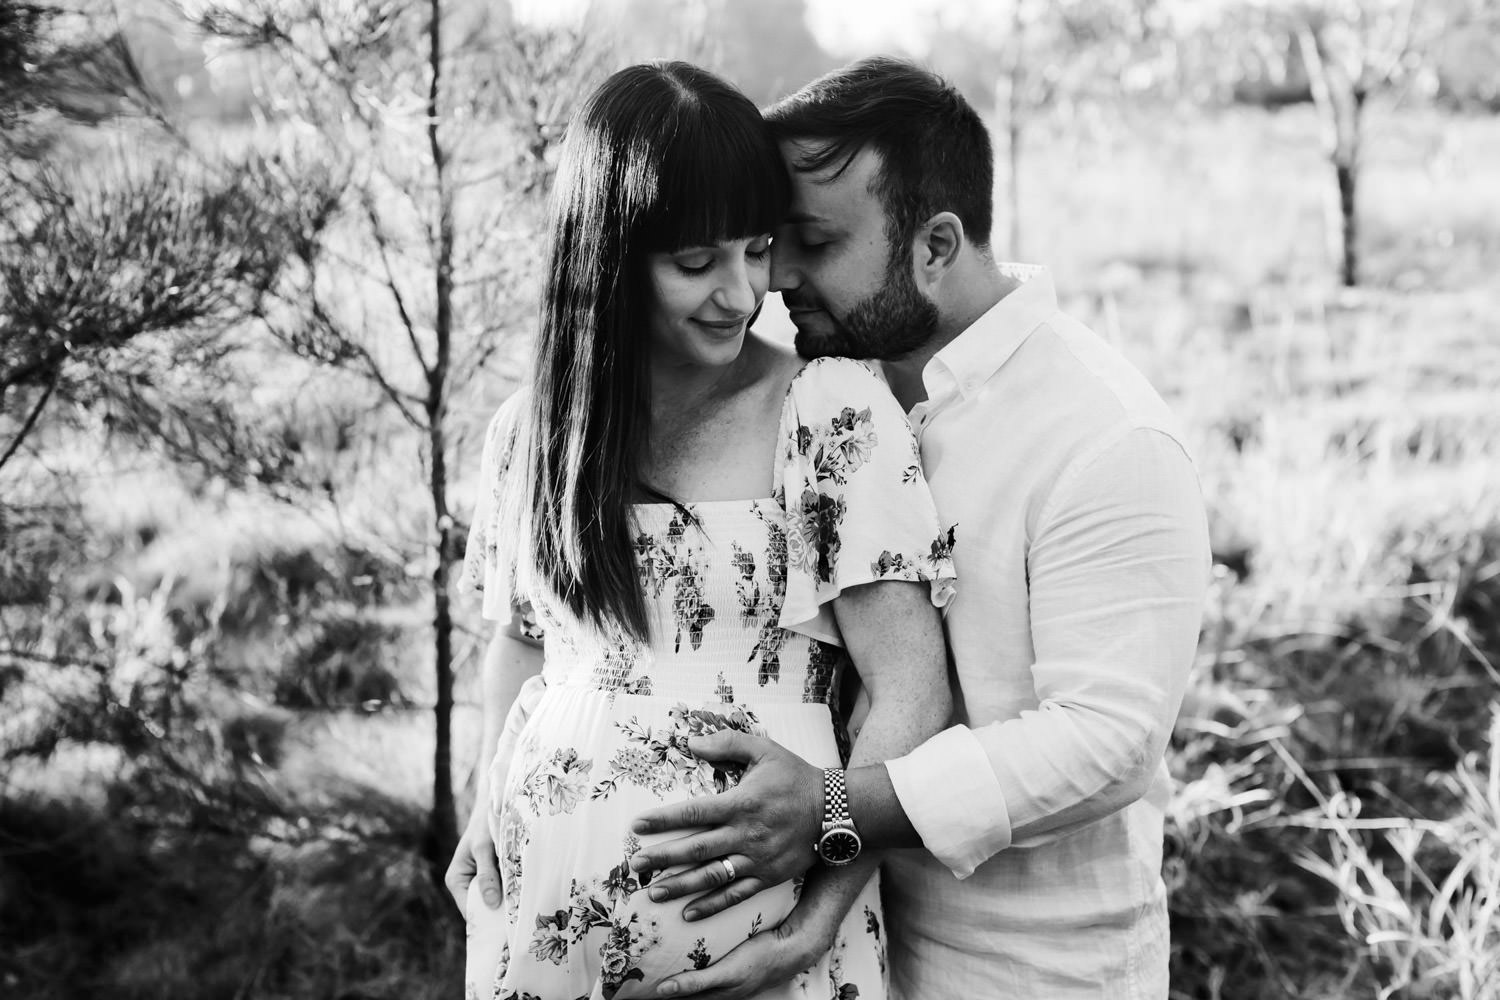 couple-in-field-romantic-maternity-images-mother-kissing-newborn-baby-brisbane-maternity-photography-packages